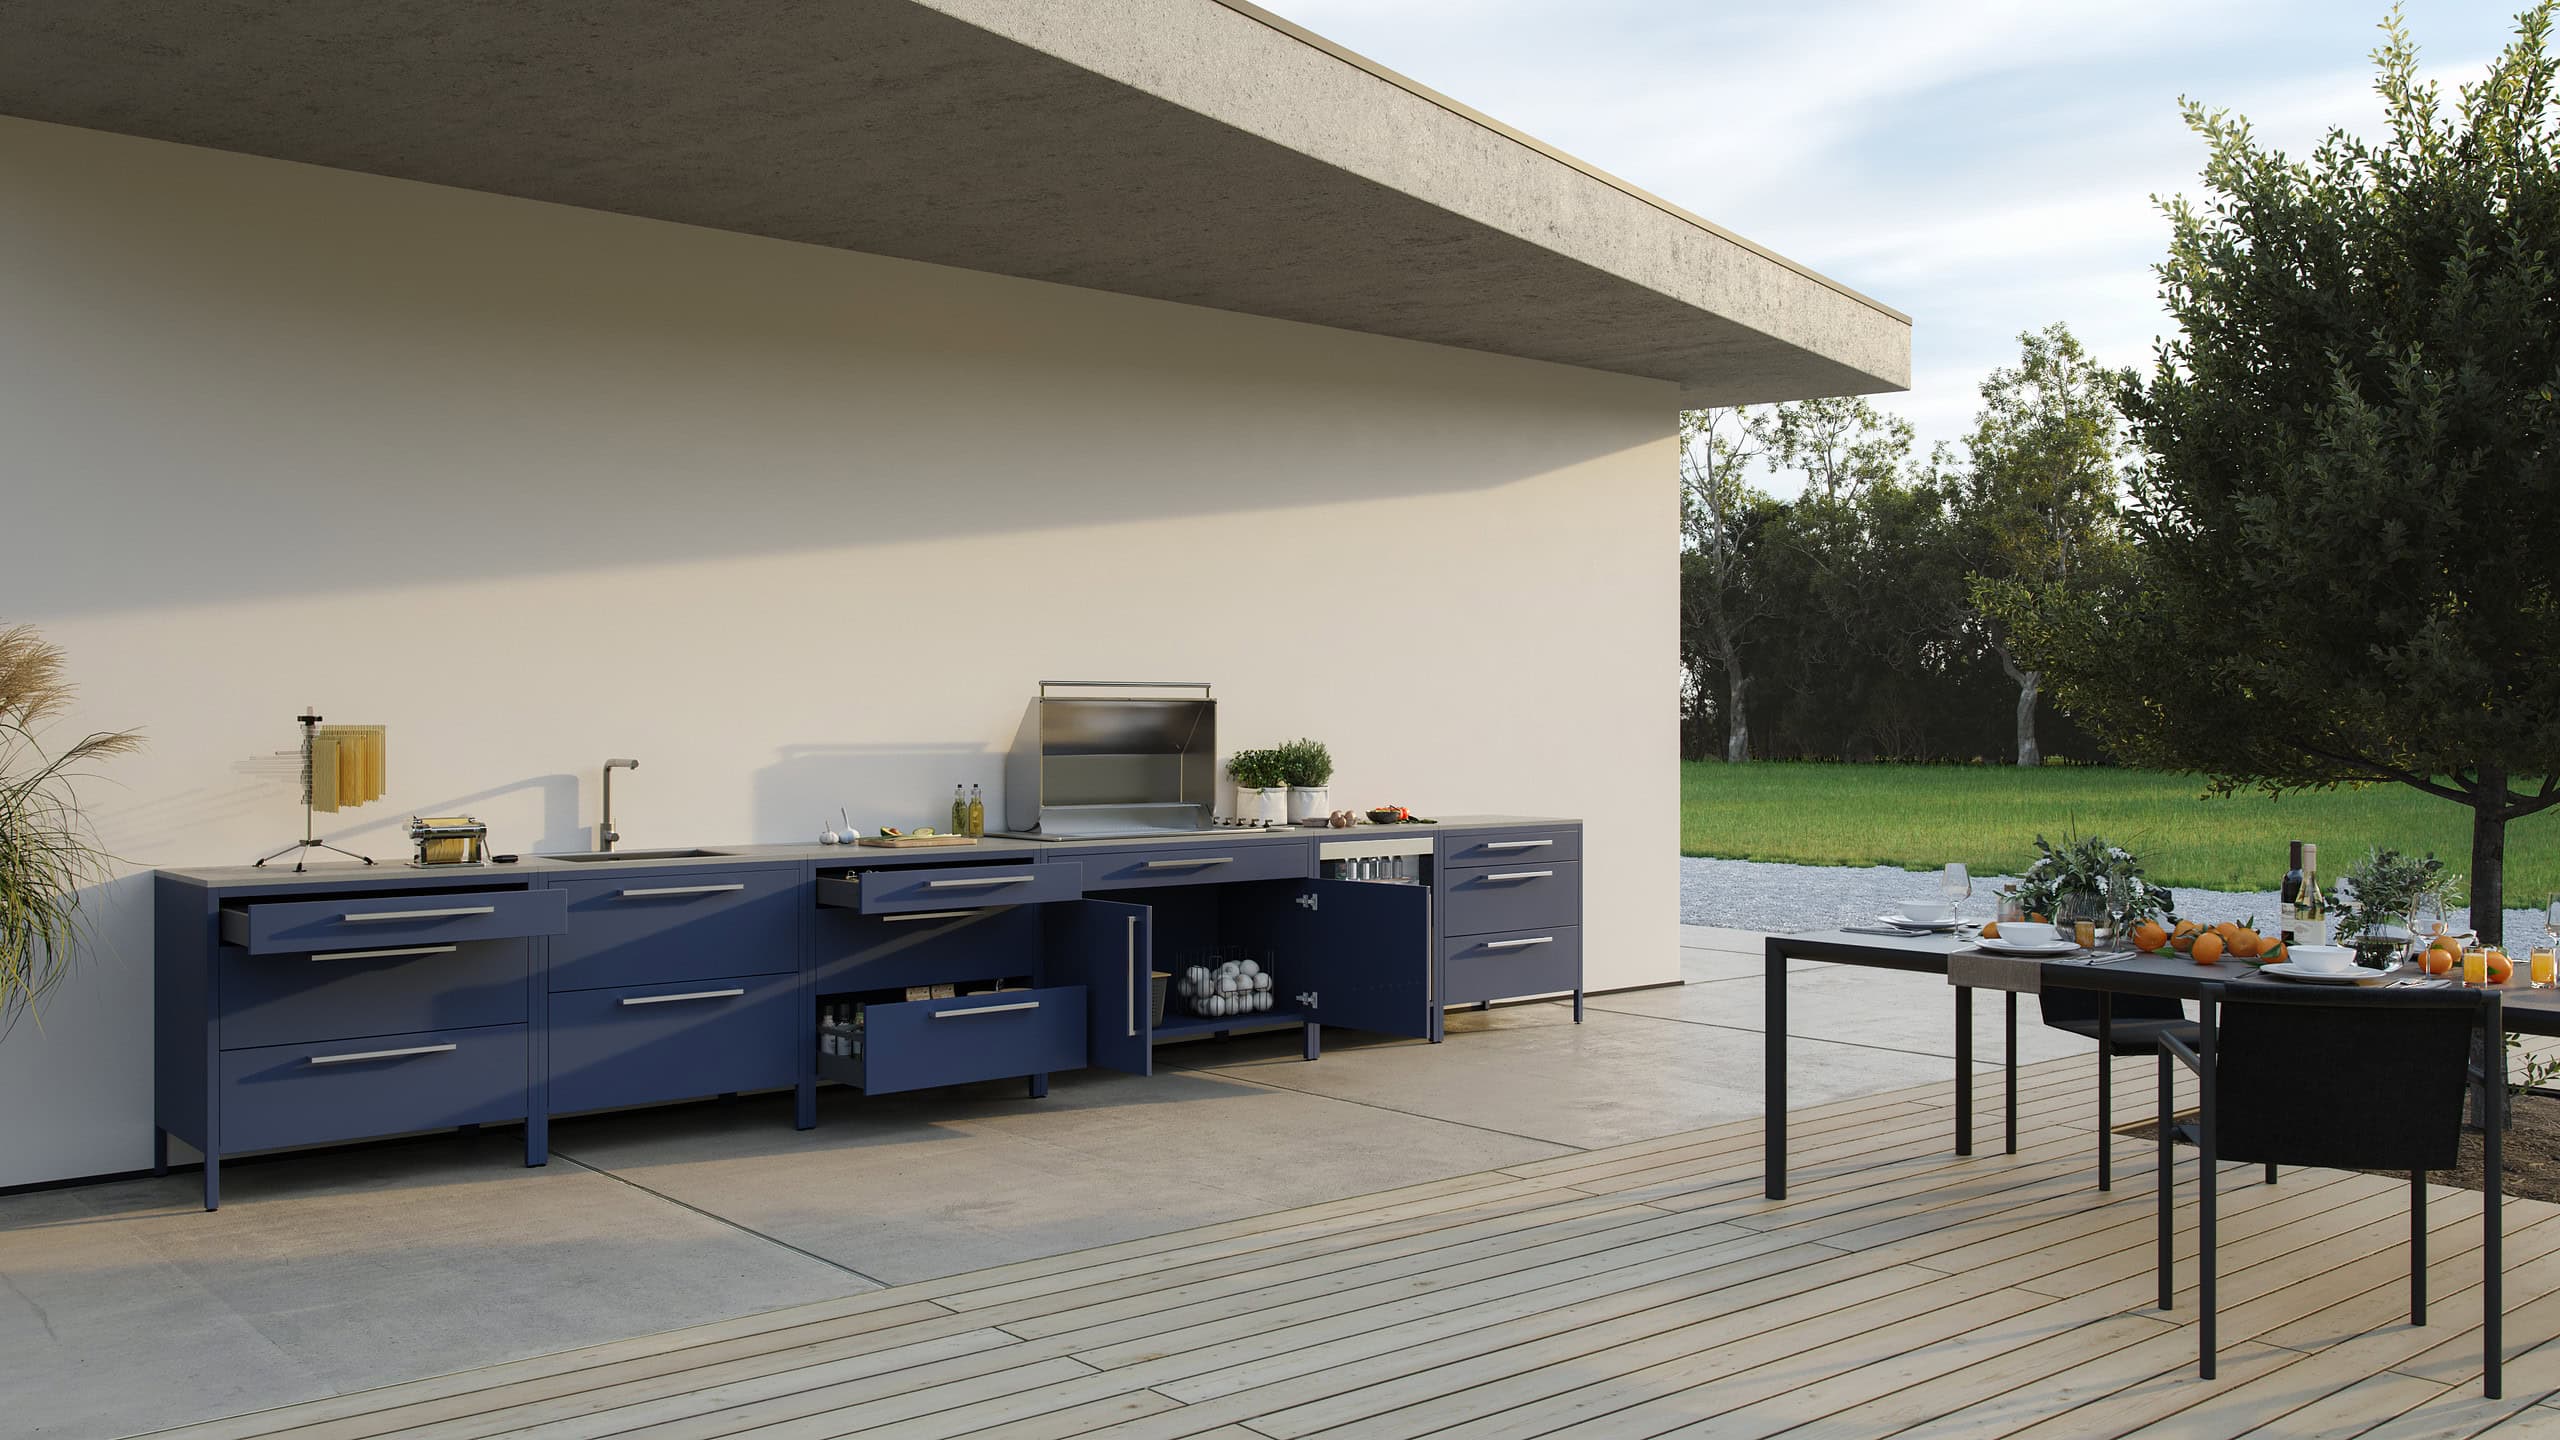 InnoTech Atira drawers, Quadro Compact runners and Veosys hinges in a nanvy blue minimalist stylish outdoor kitchen